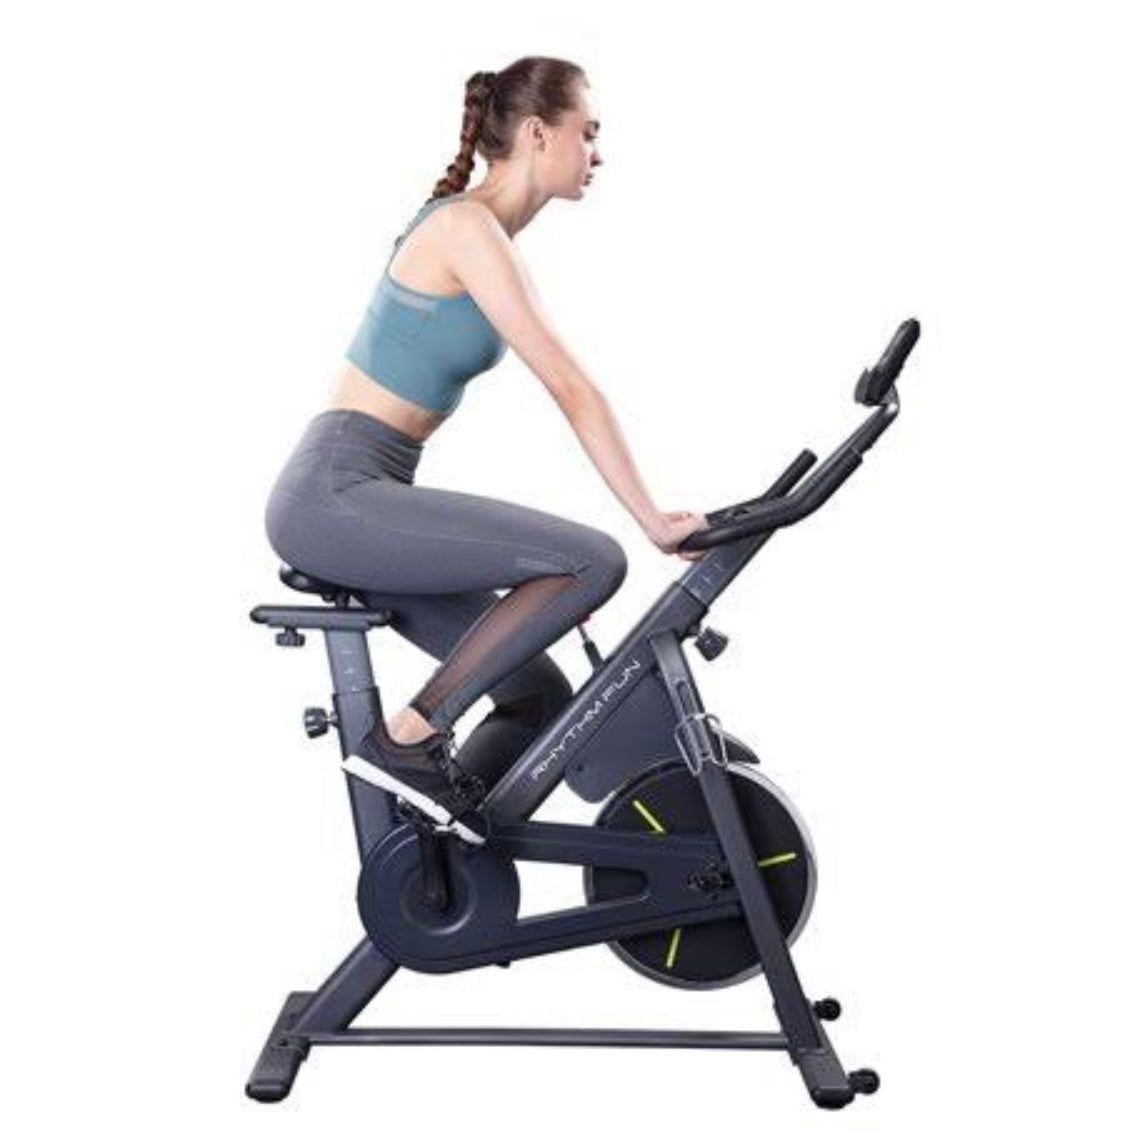 Exercise Bikes with LCD Monitor for Home Cardio Workout Bike Training- Black (Black)